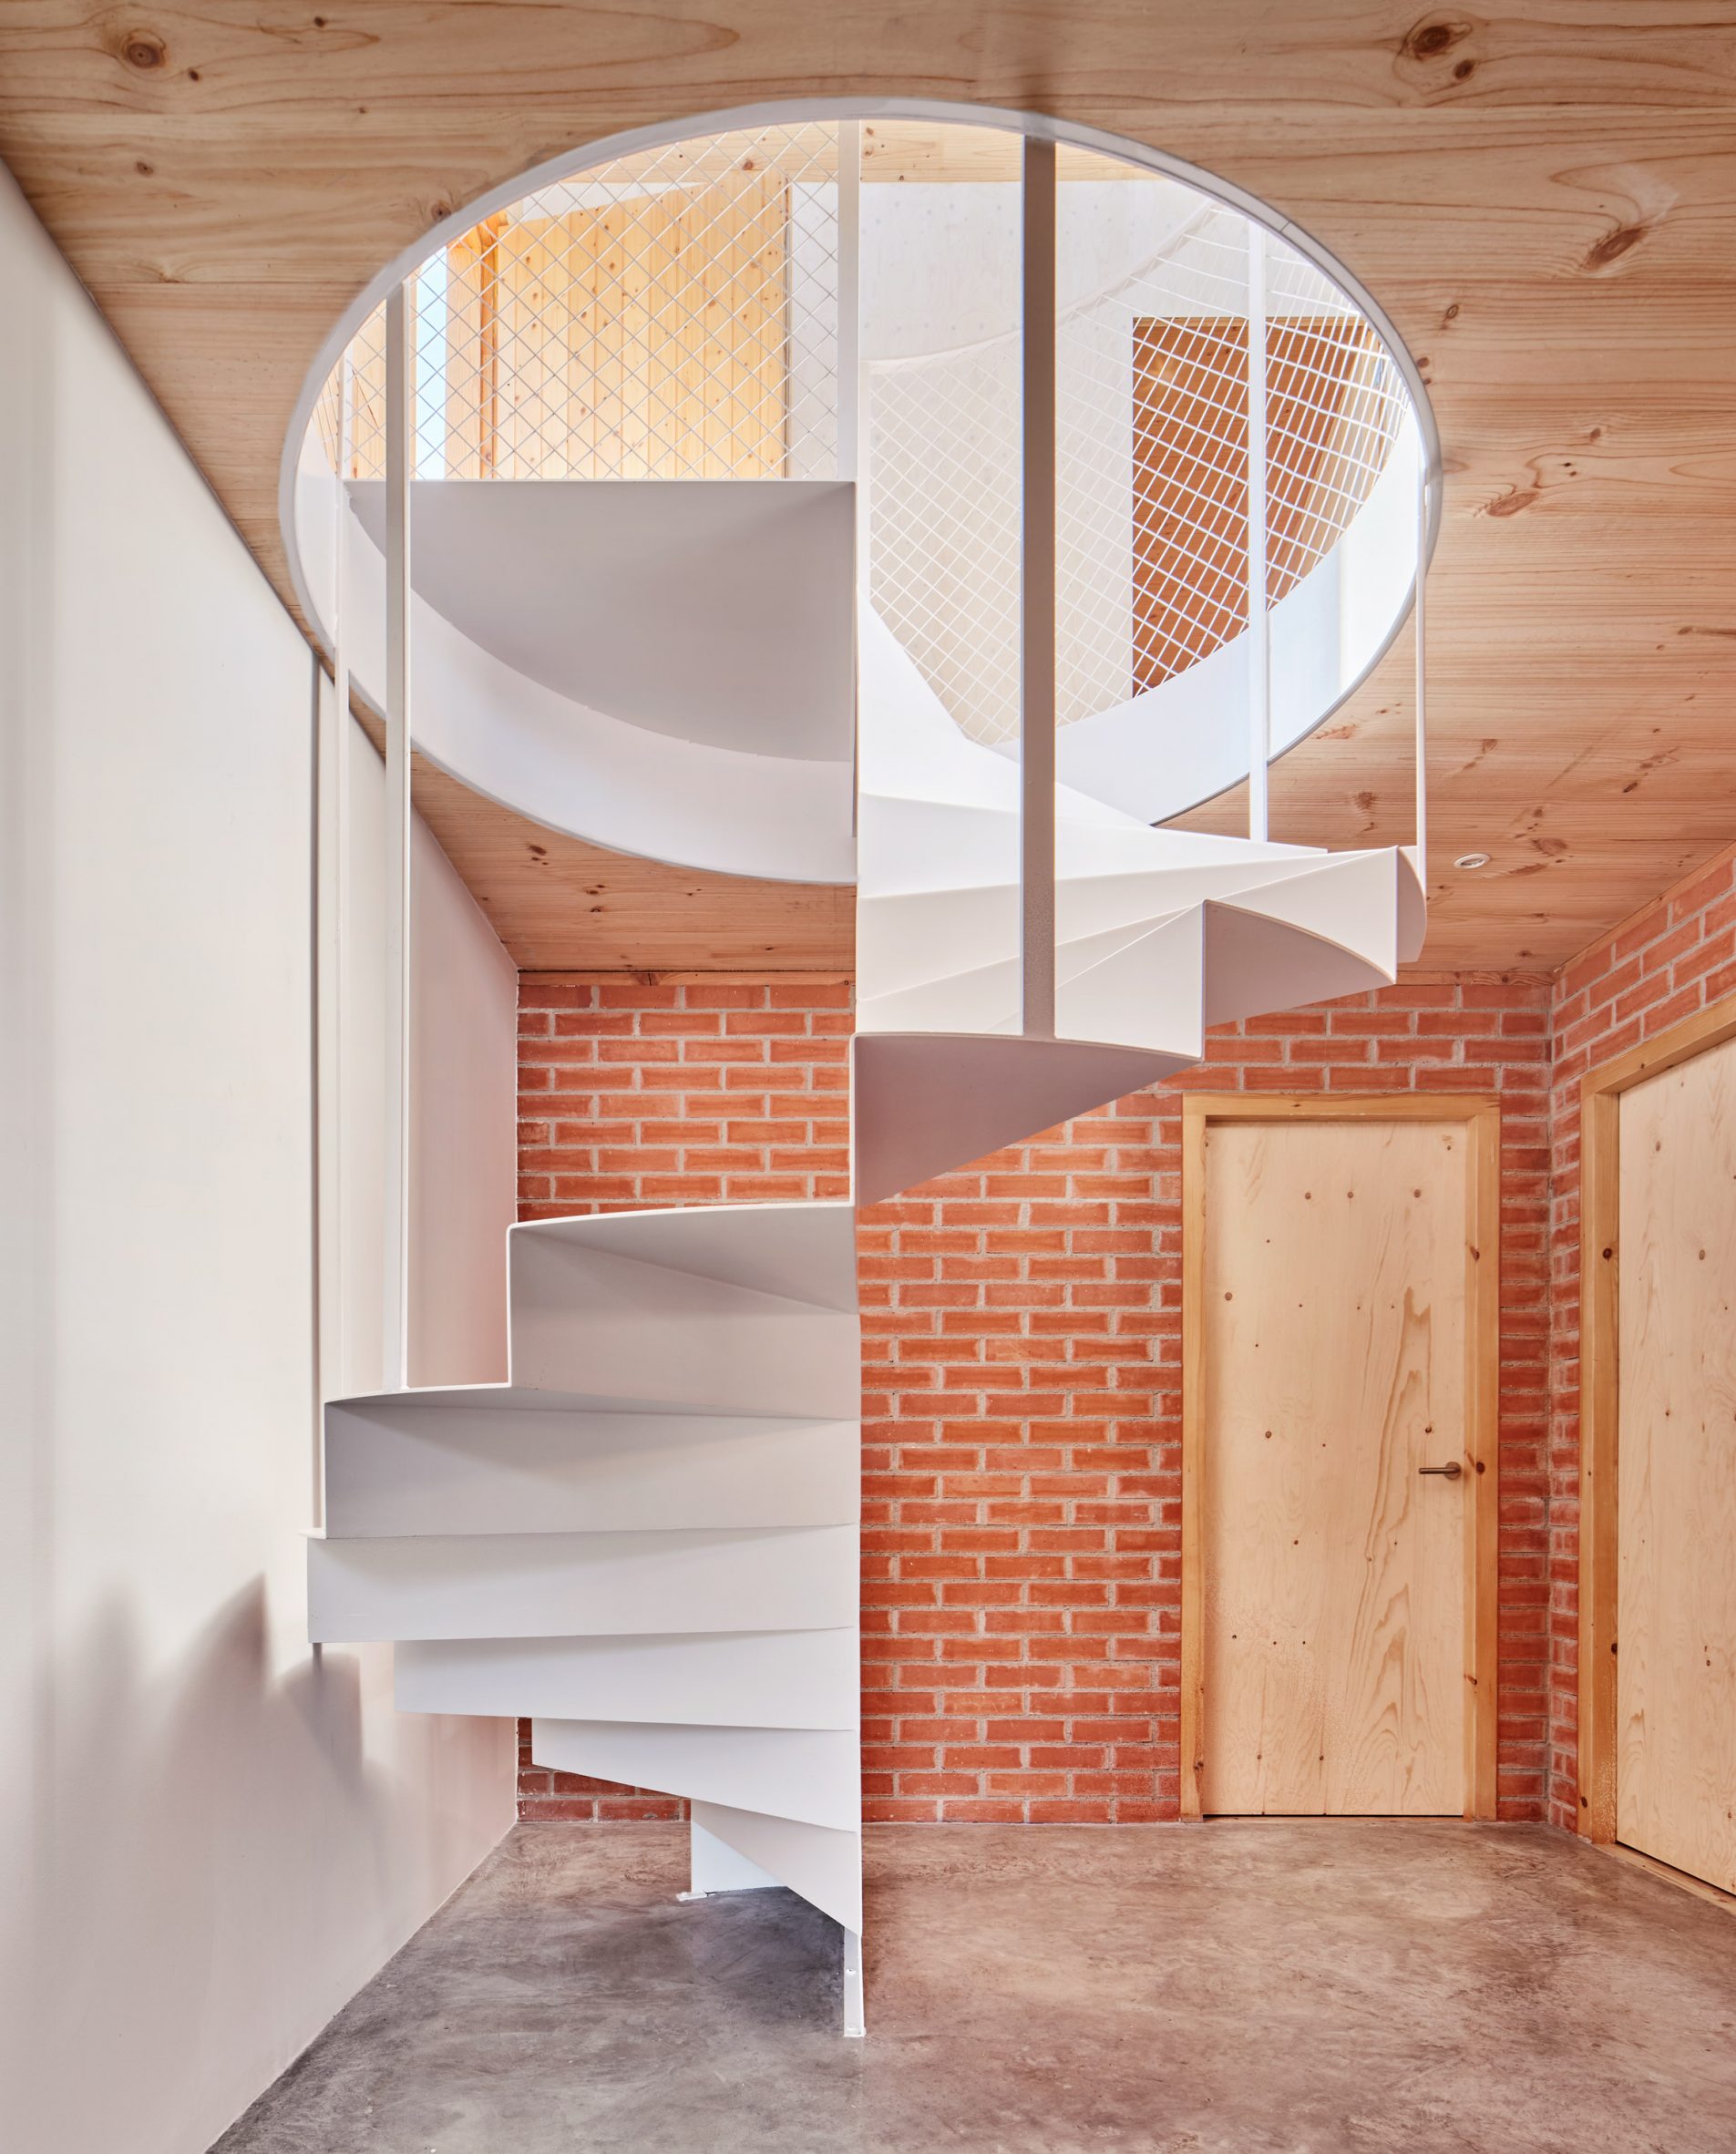 Spiral staircase in Spanish home by Agora Arquitectura